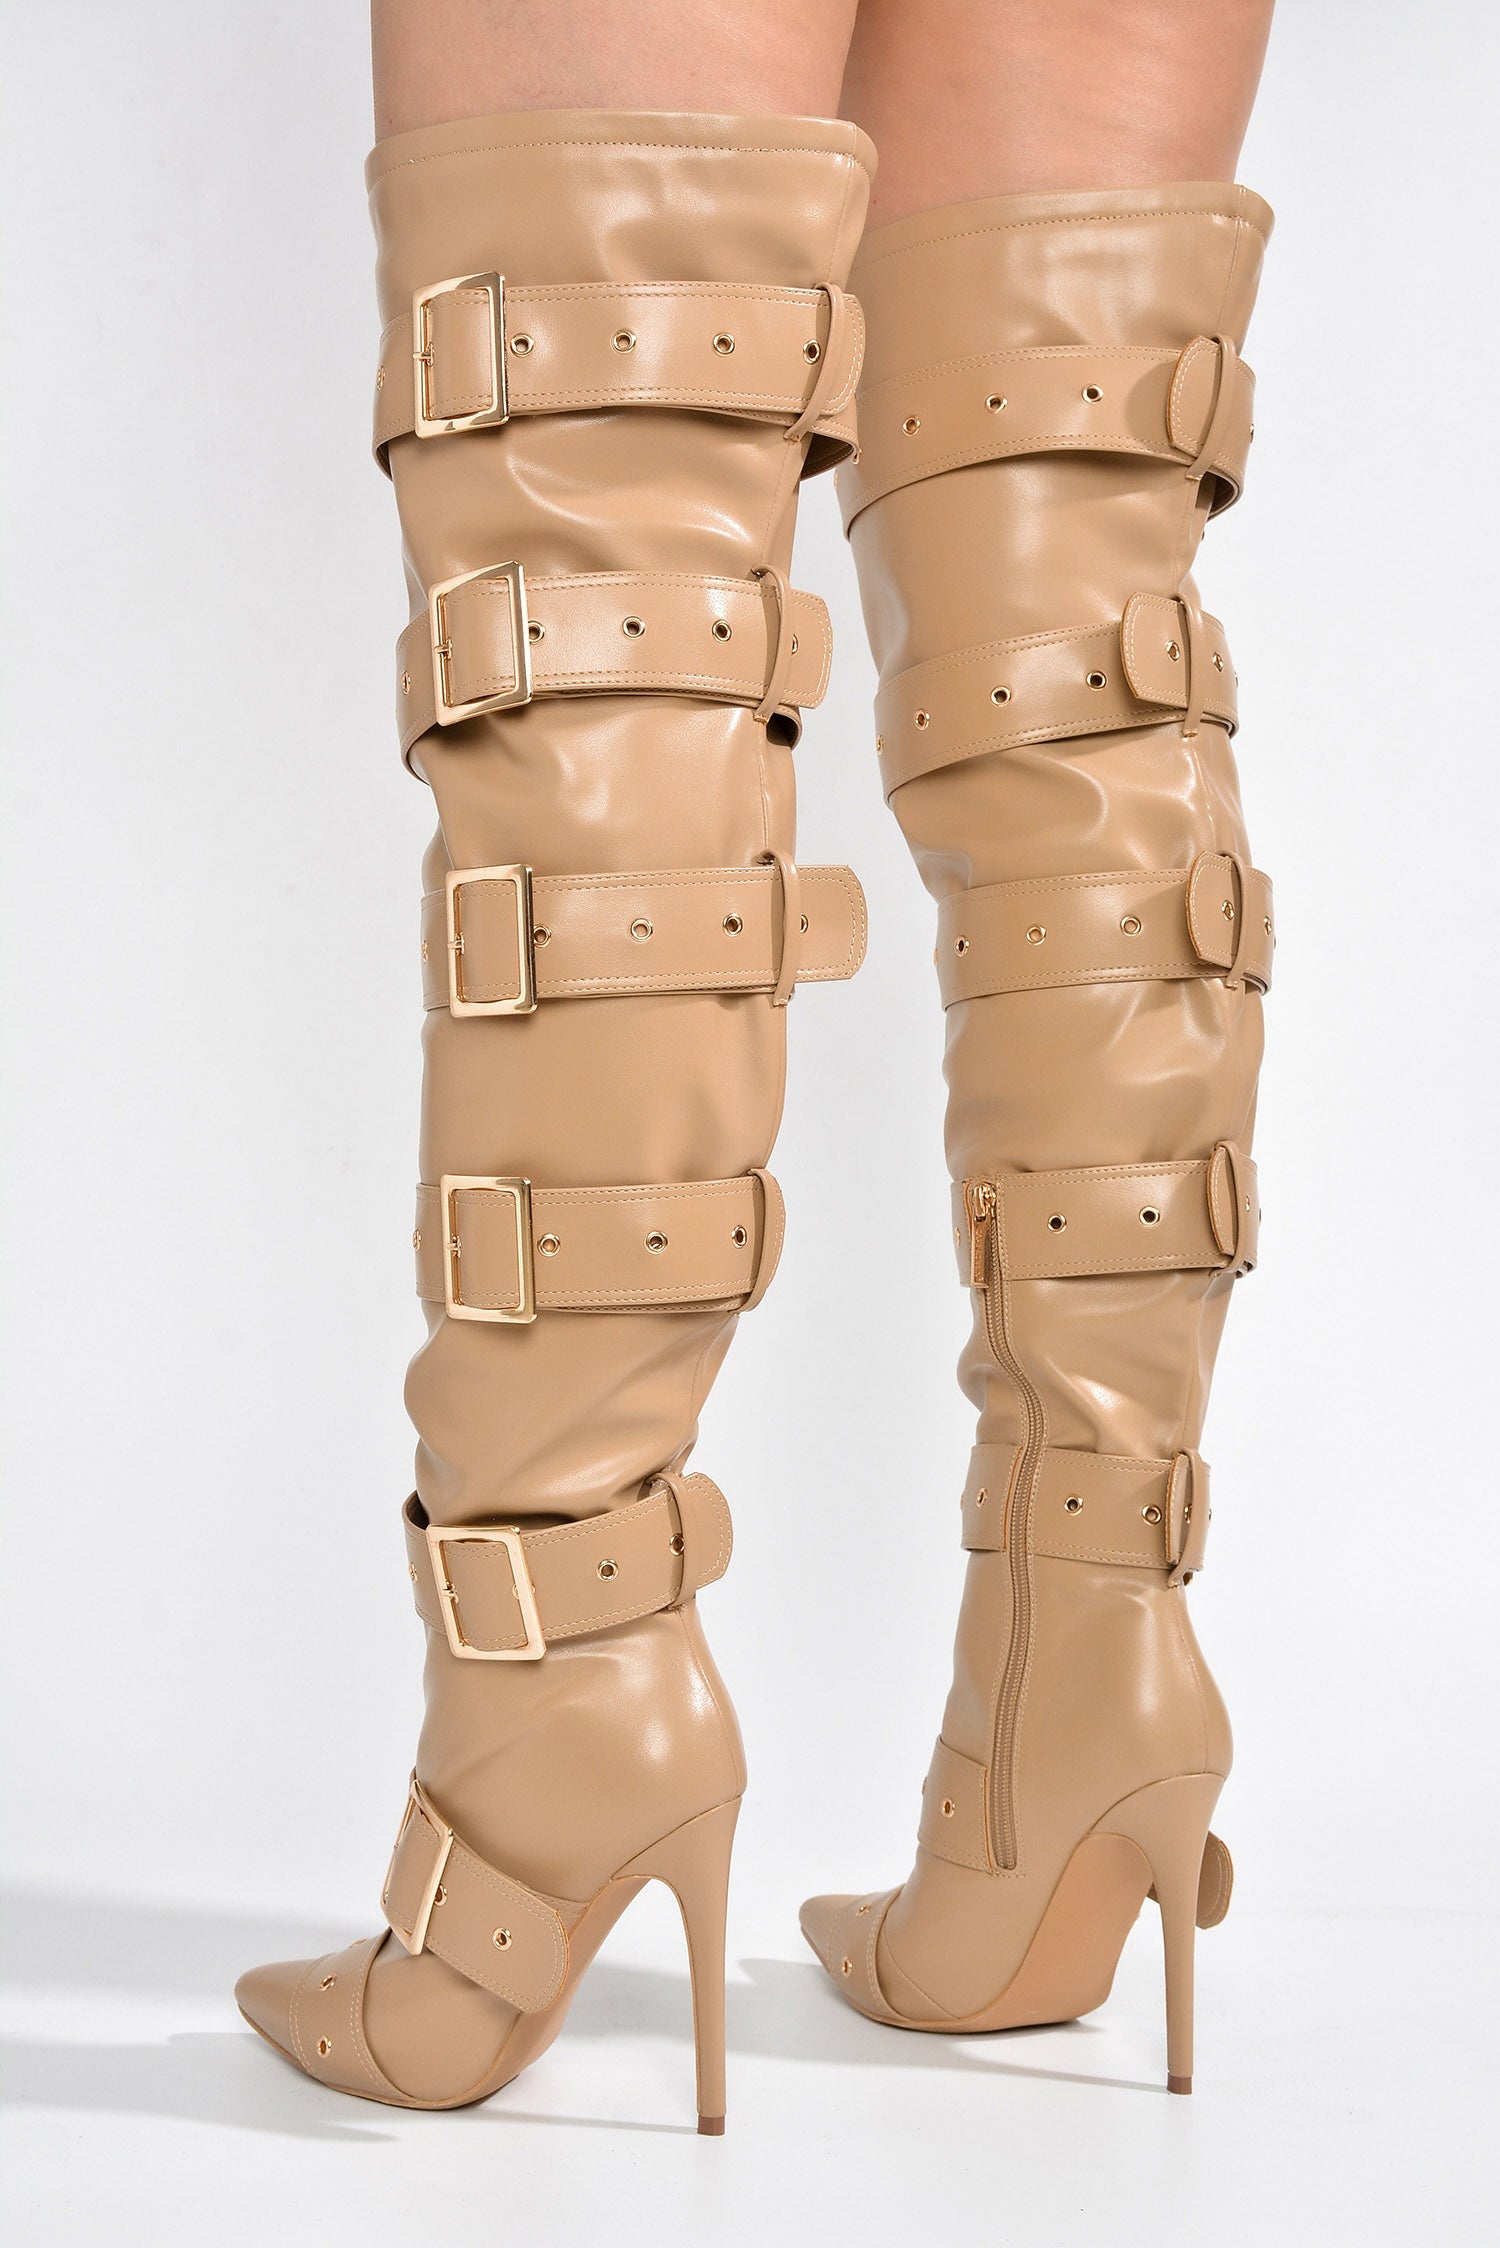 Fatale Multi Buckle Knee High Boots